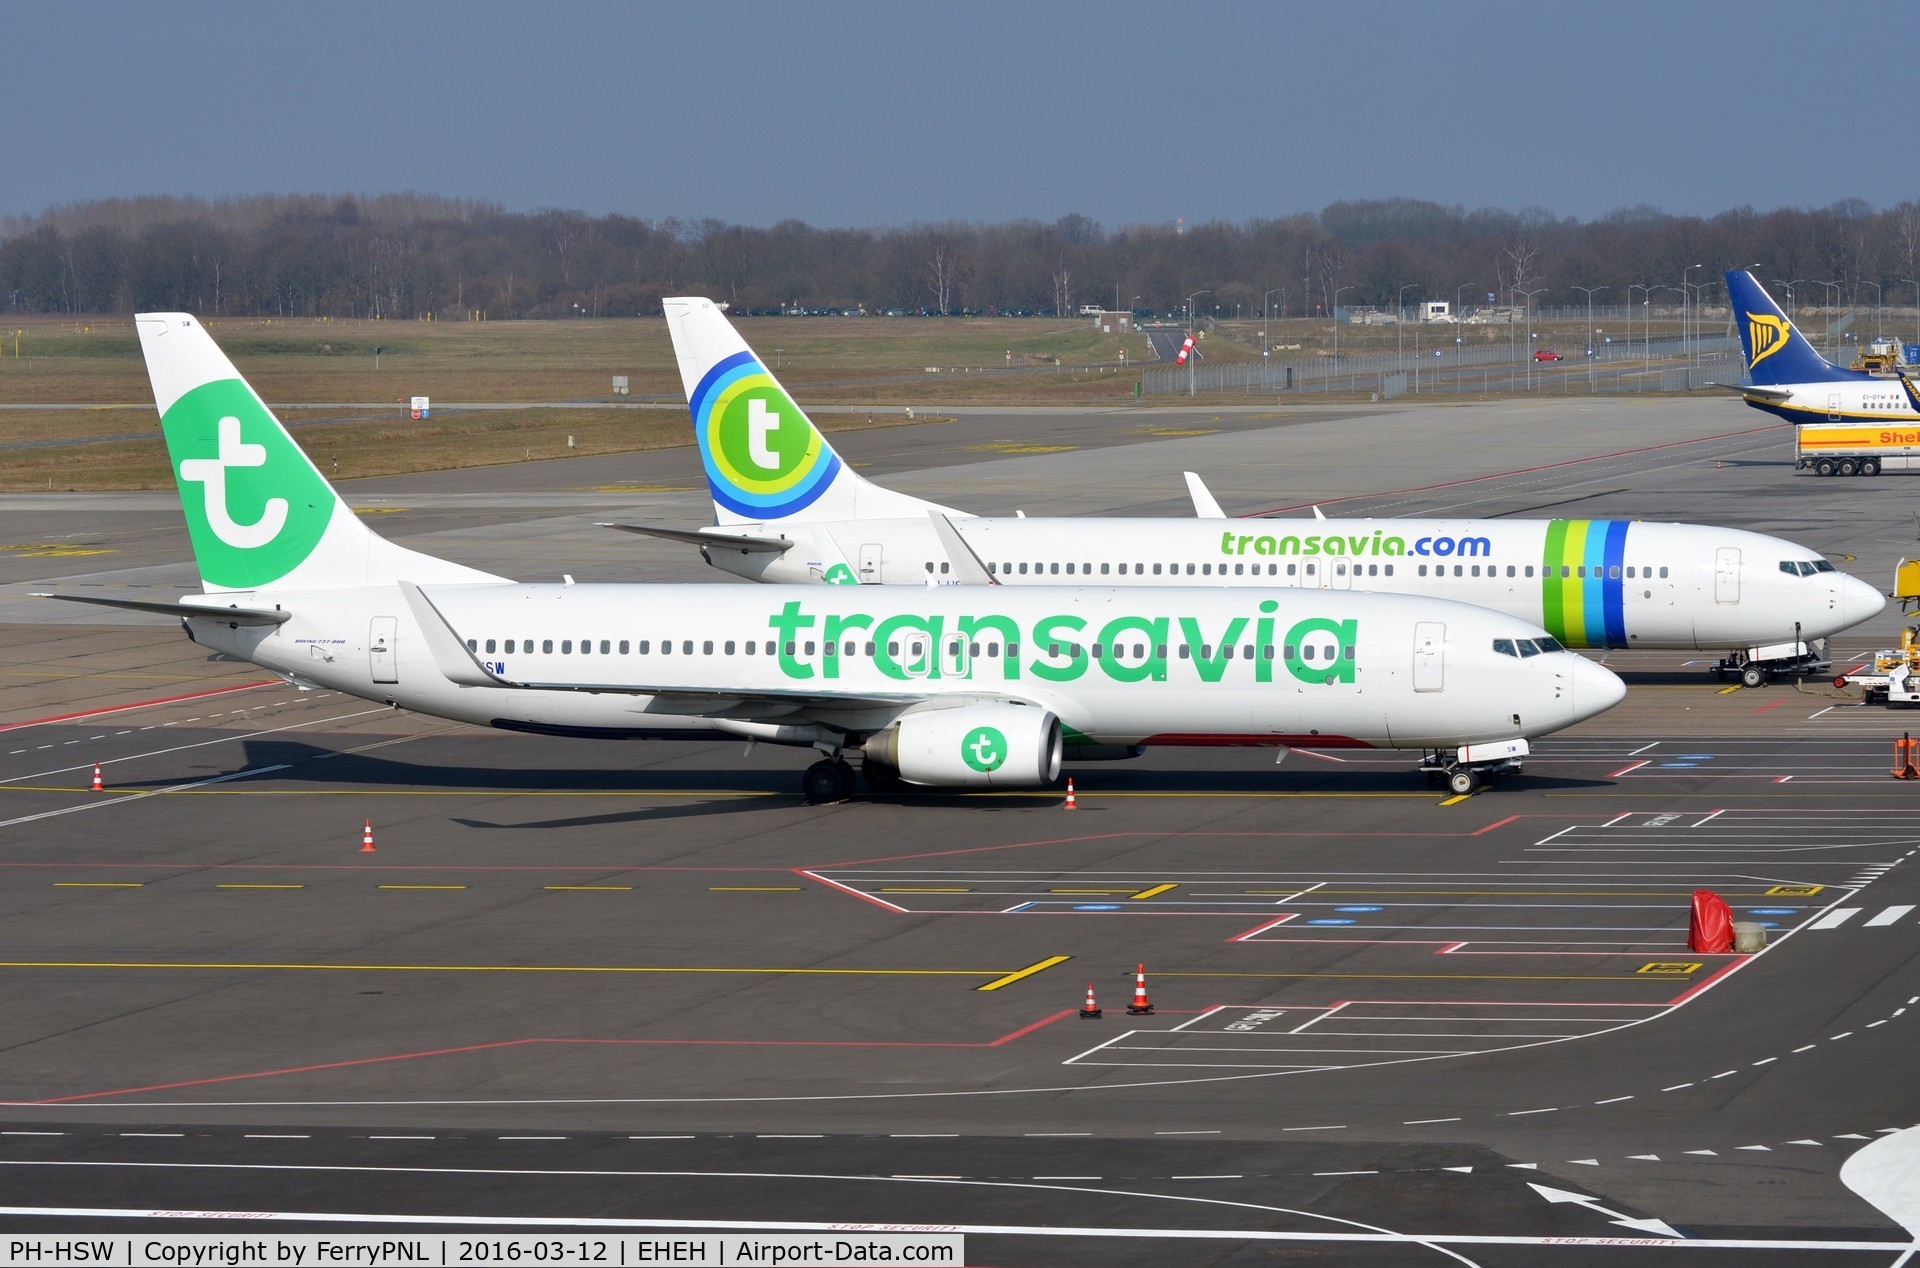 PH-HSW, 2009 Boeing 737-8K2 C/N 37160, Transavia in old and new c/s